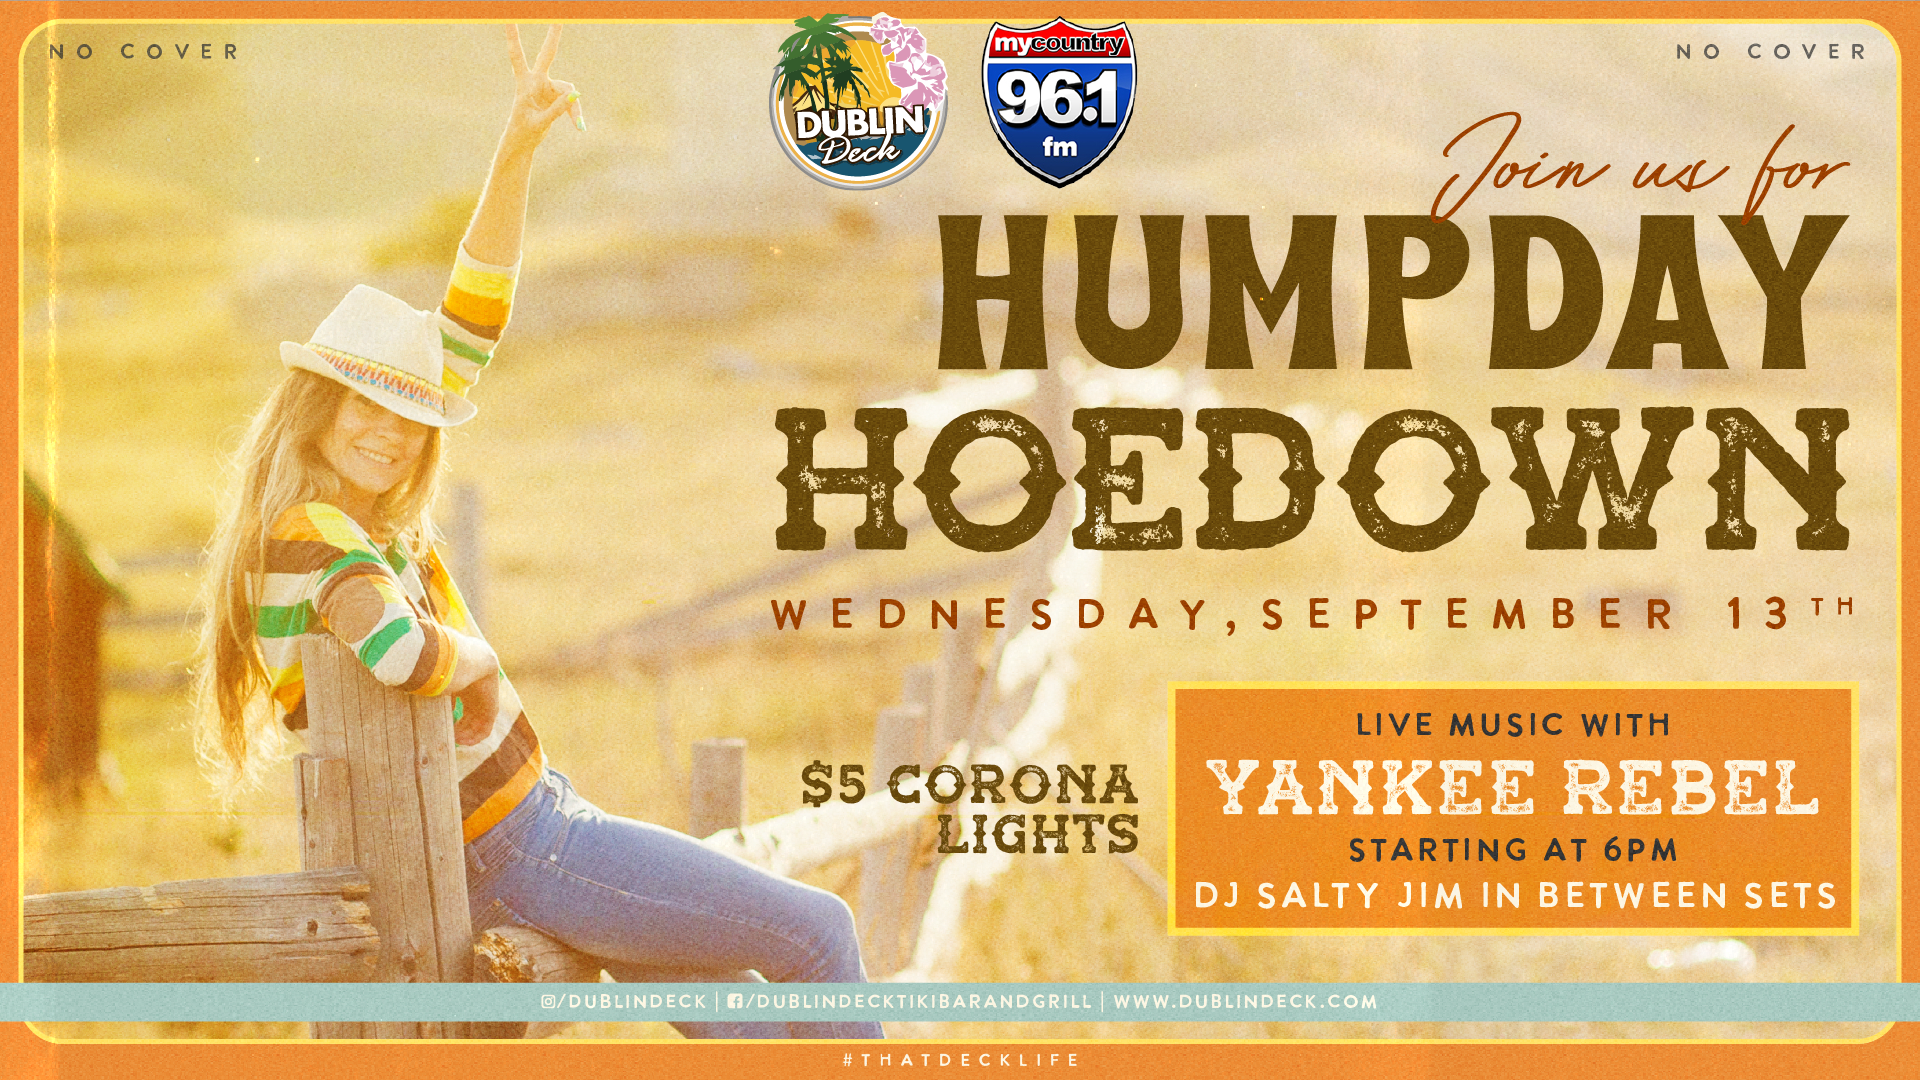 Head down to Dublin Deck for Humpday Hoedown with Yankee Rebel! Music begins at 6PM